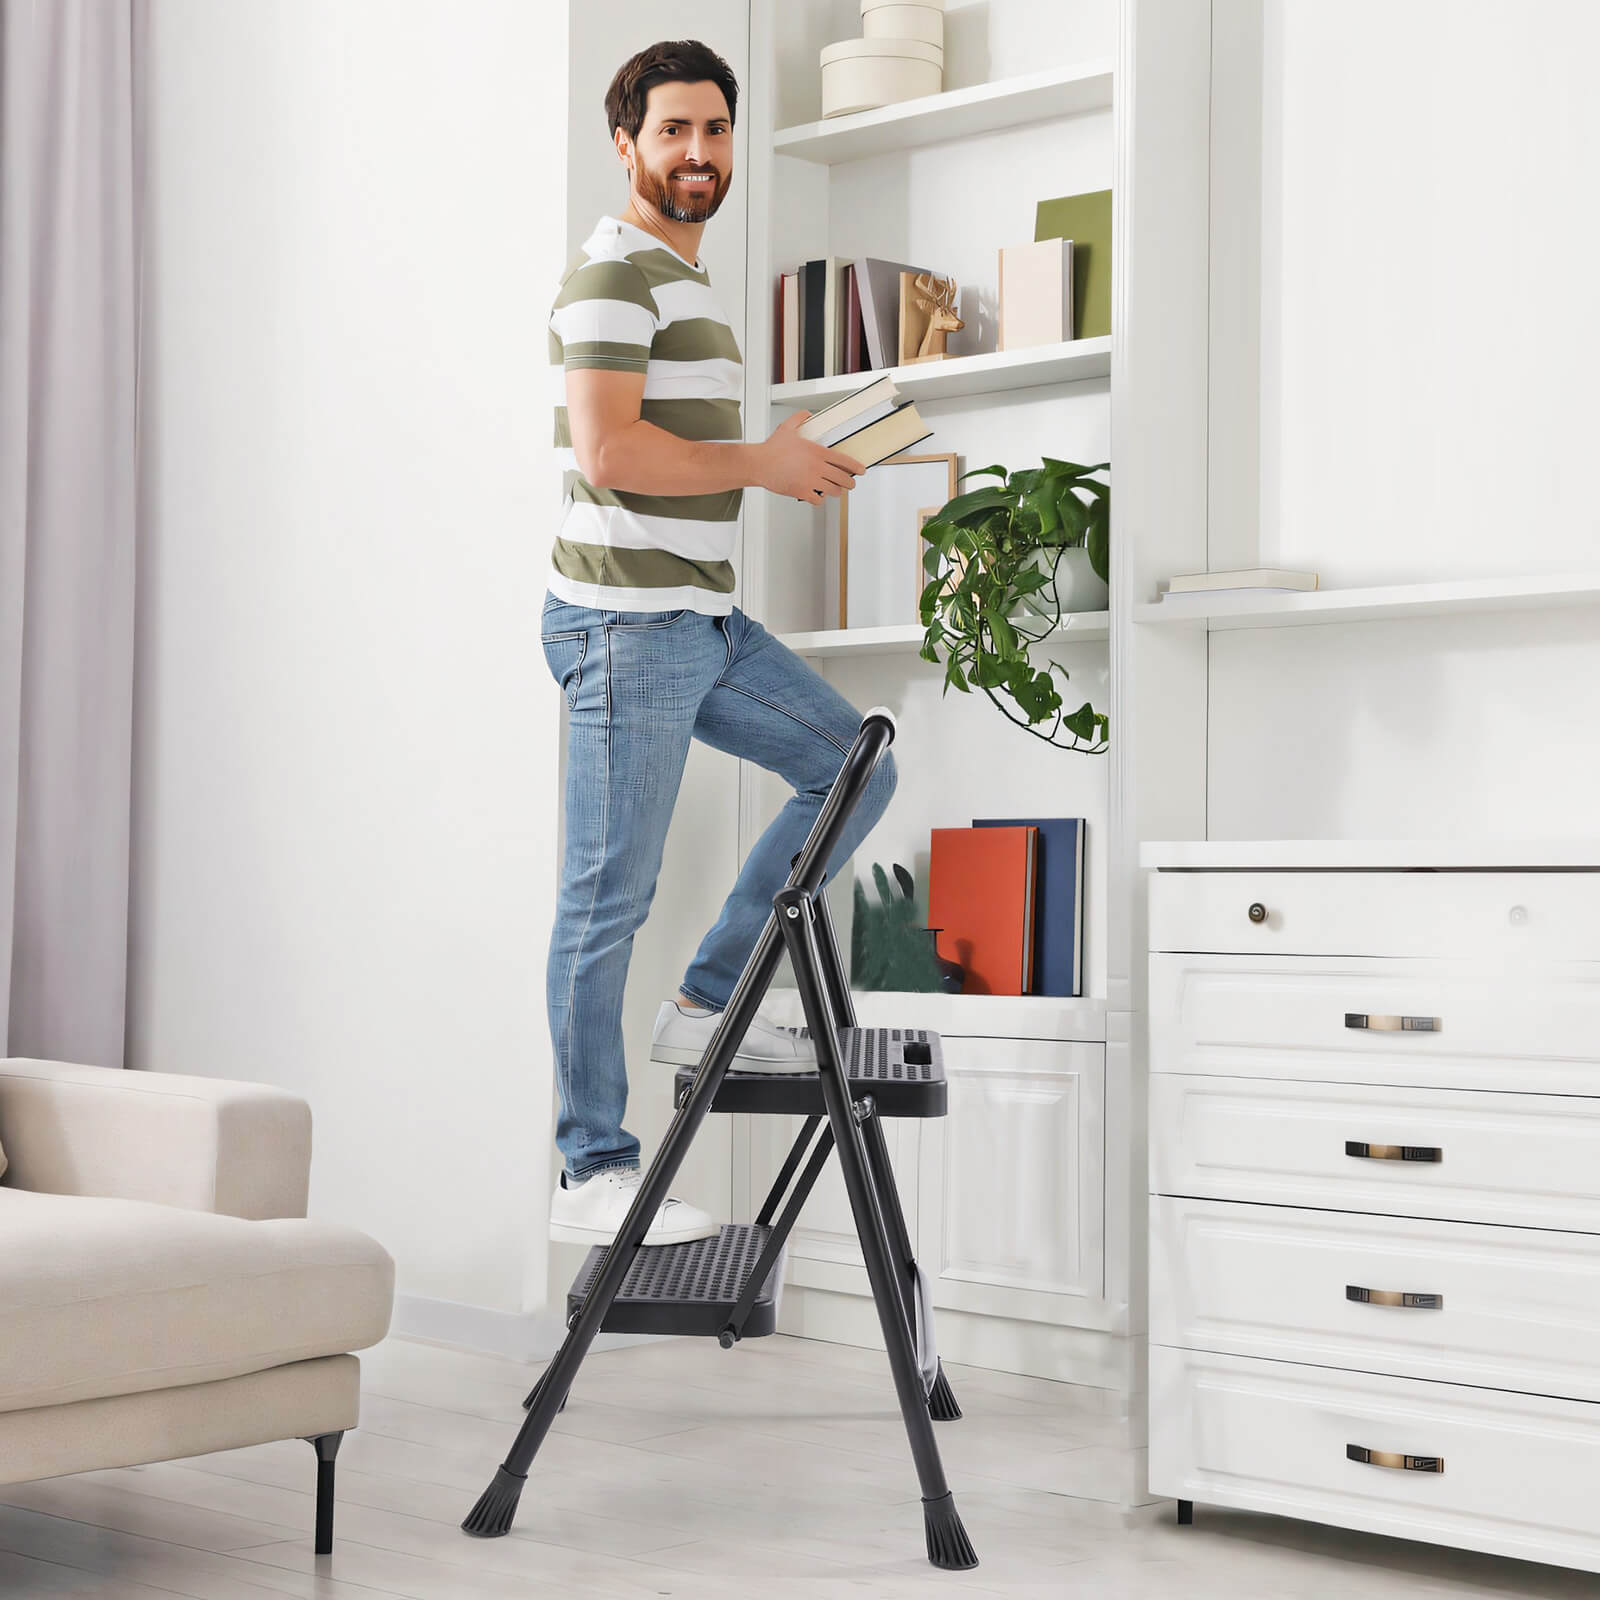 2-step non-slip ladder, 800 lbs Capacity, Foldable, For use in the home and outdoors, picking up and dropping off items